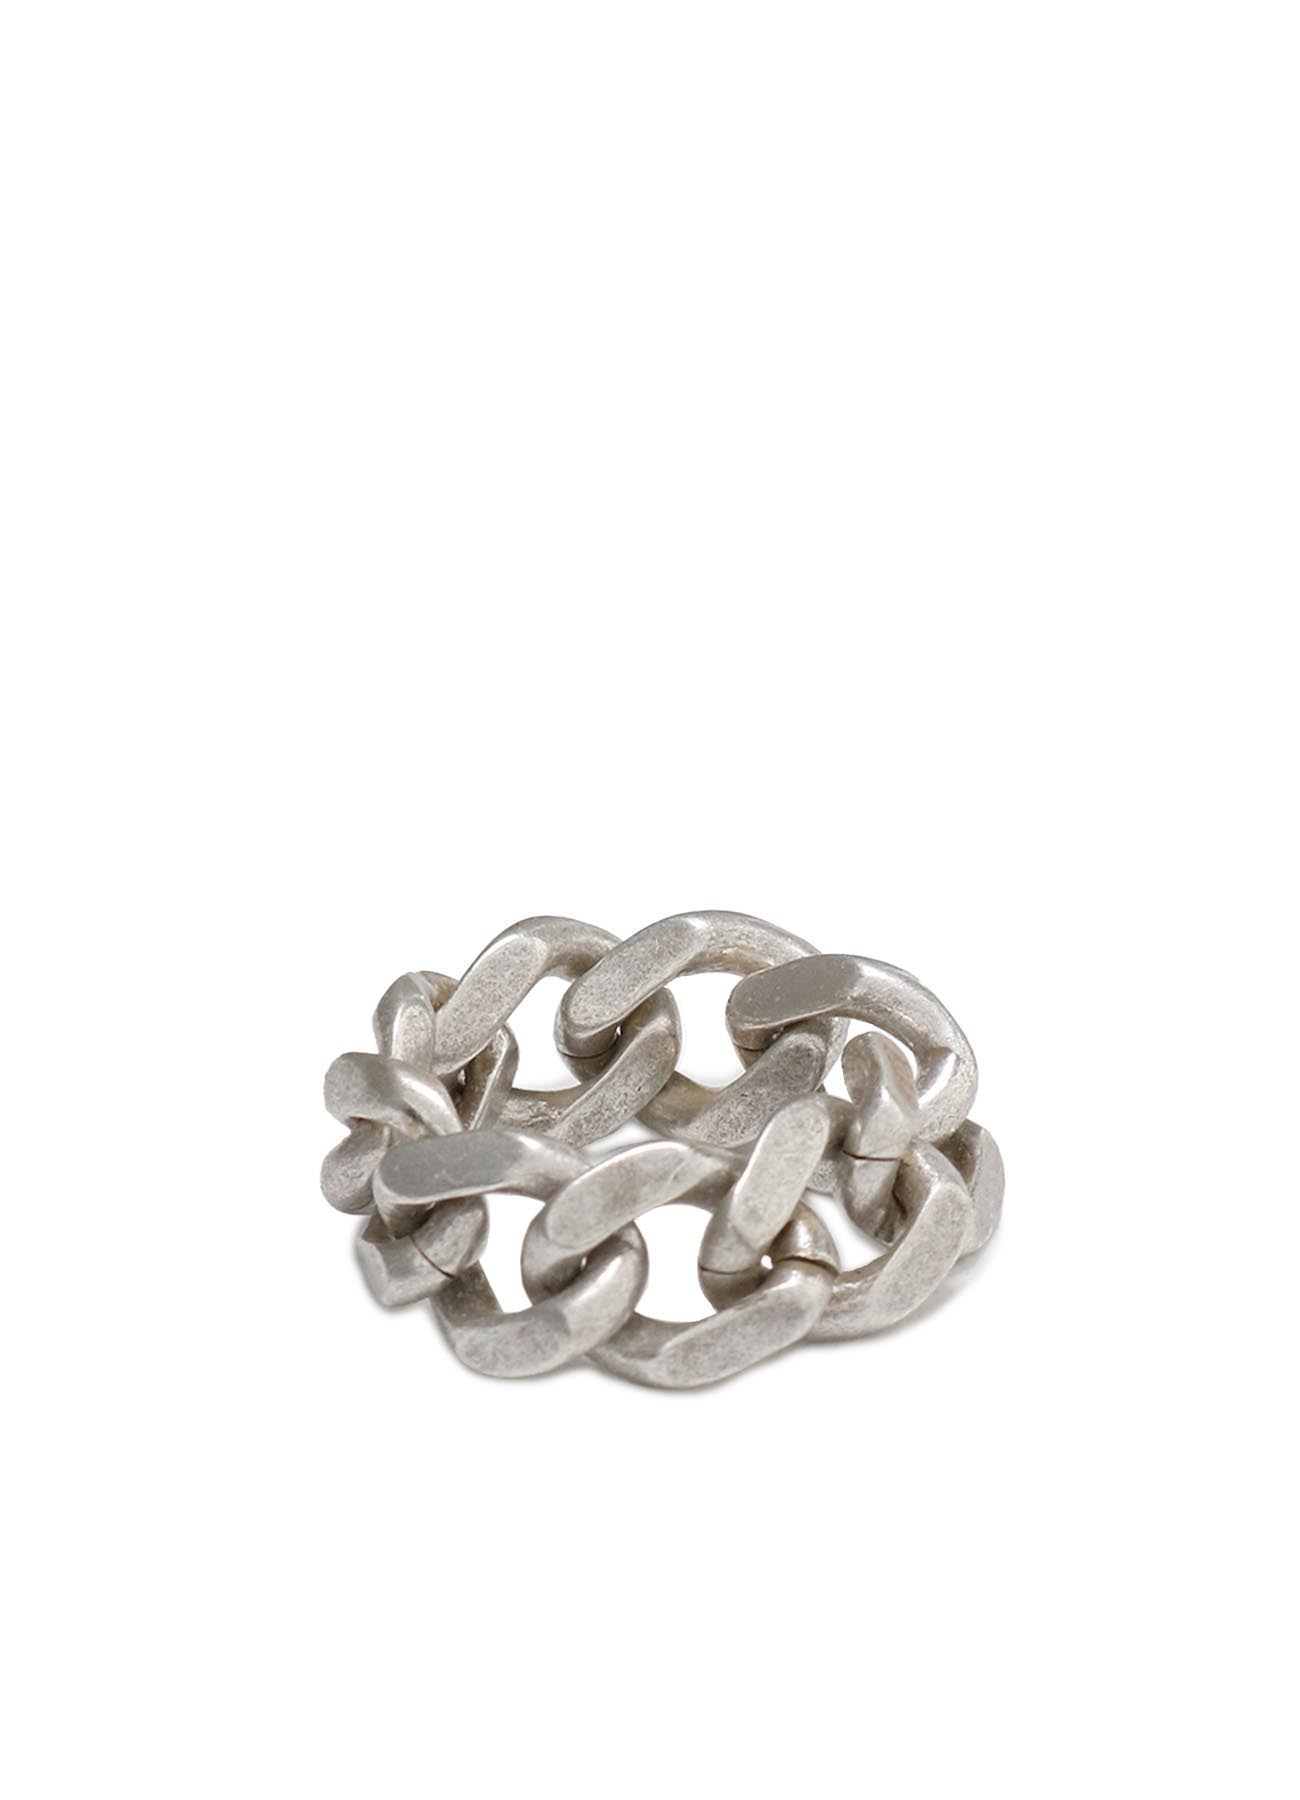 Brass Curved Chain Ring